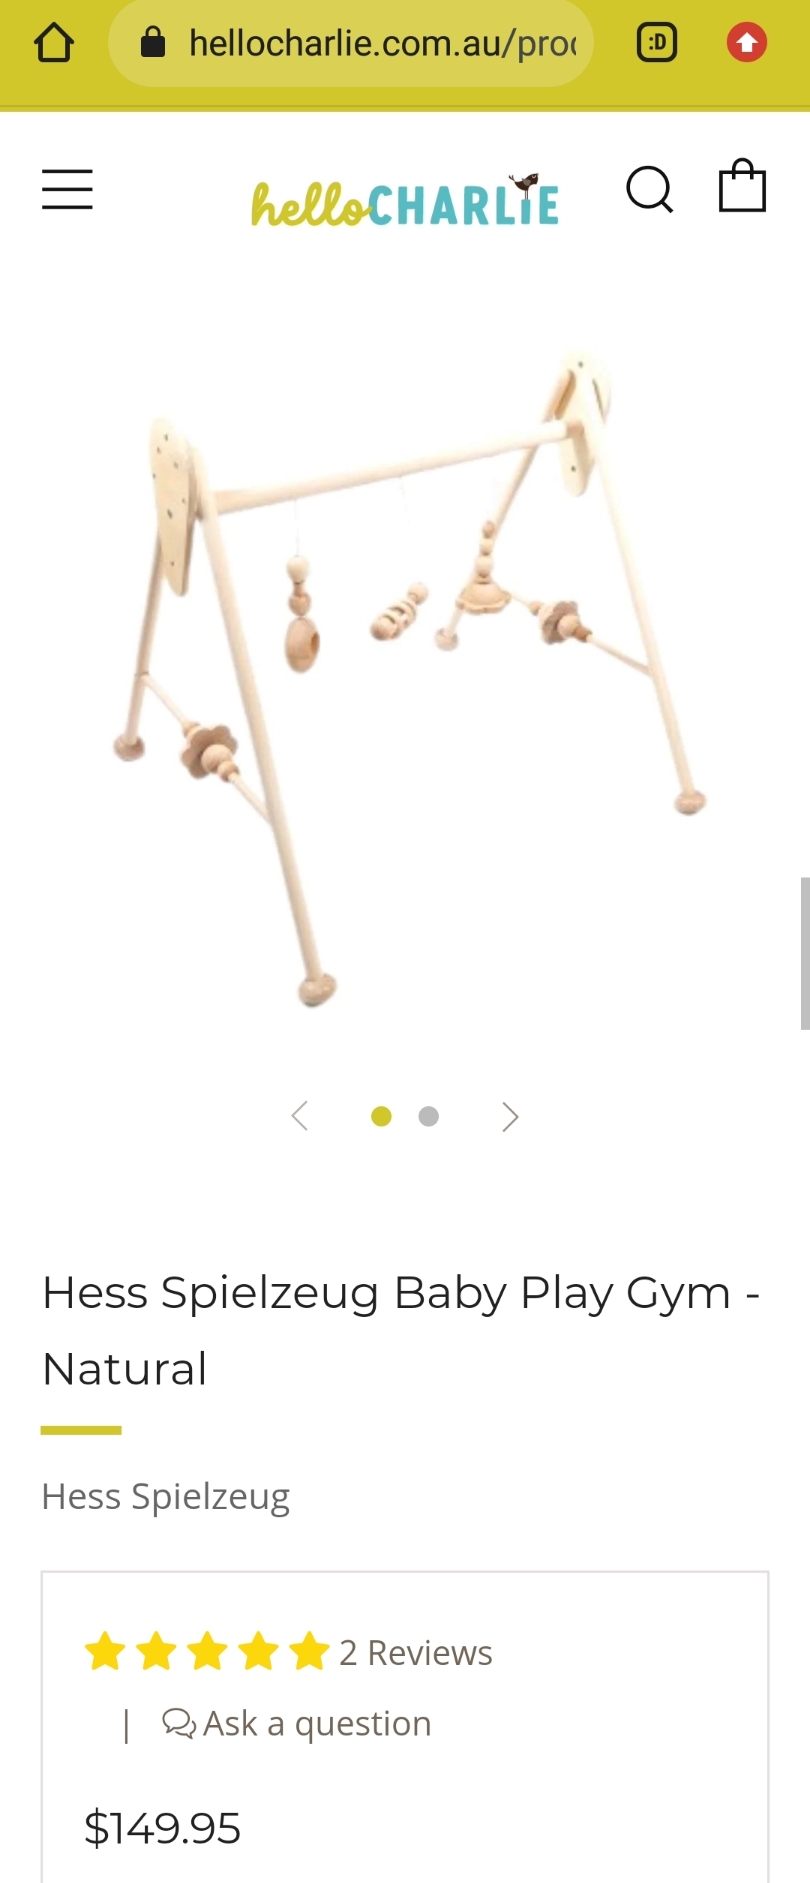 Hess Spielzeug Baby Play Gym - Natural